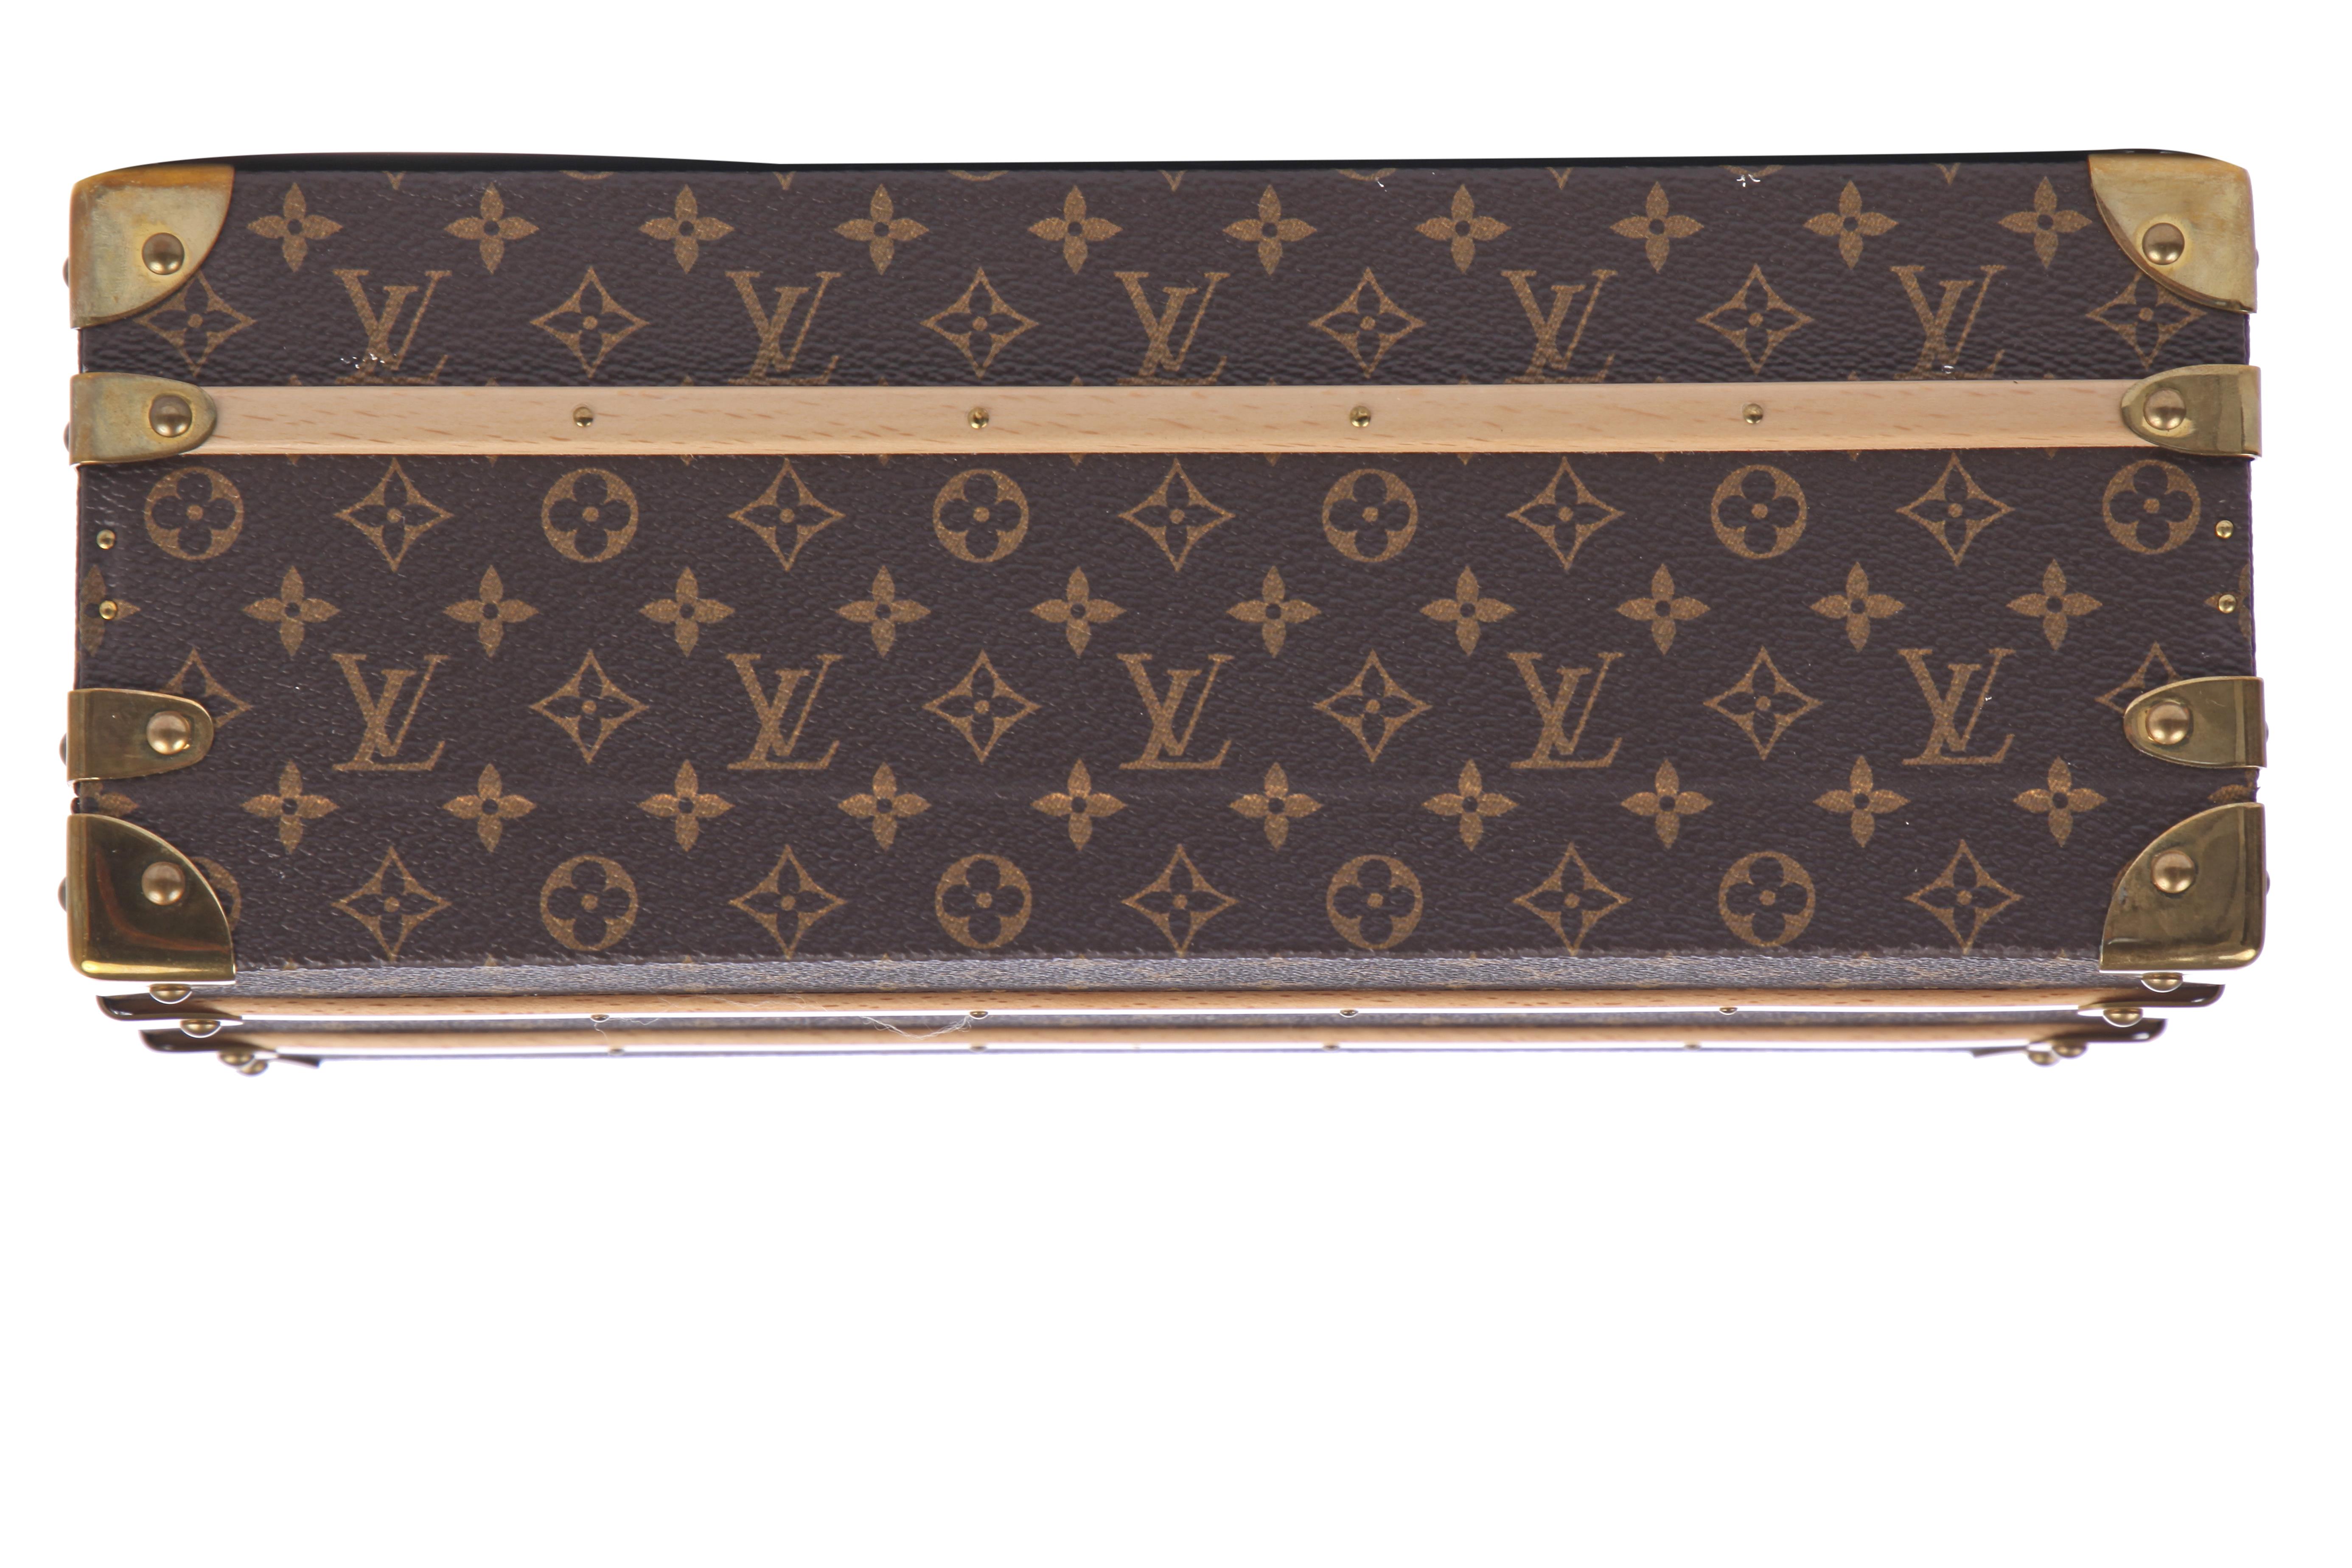 Sold at Auction: A Louis Vuitton leather and monogram canvas Alzer